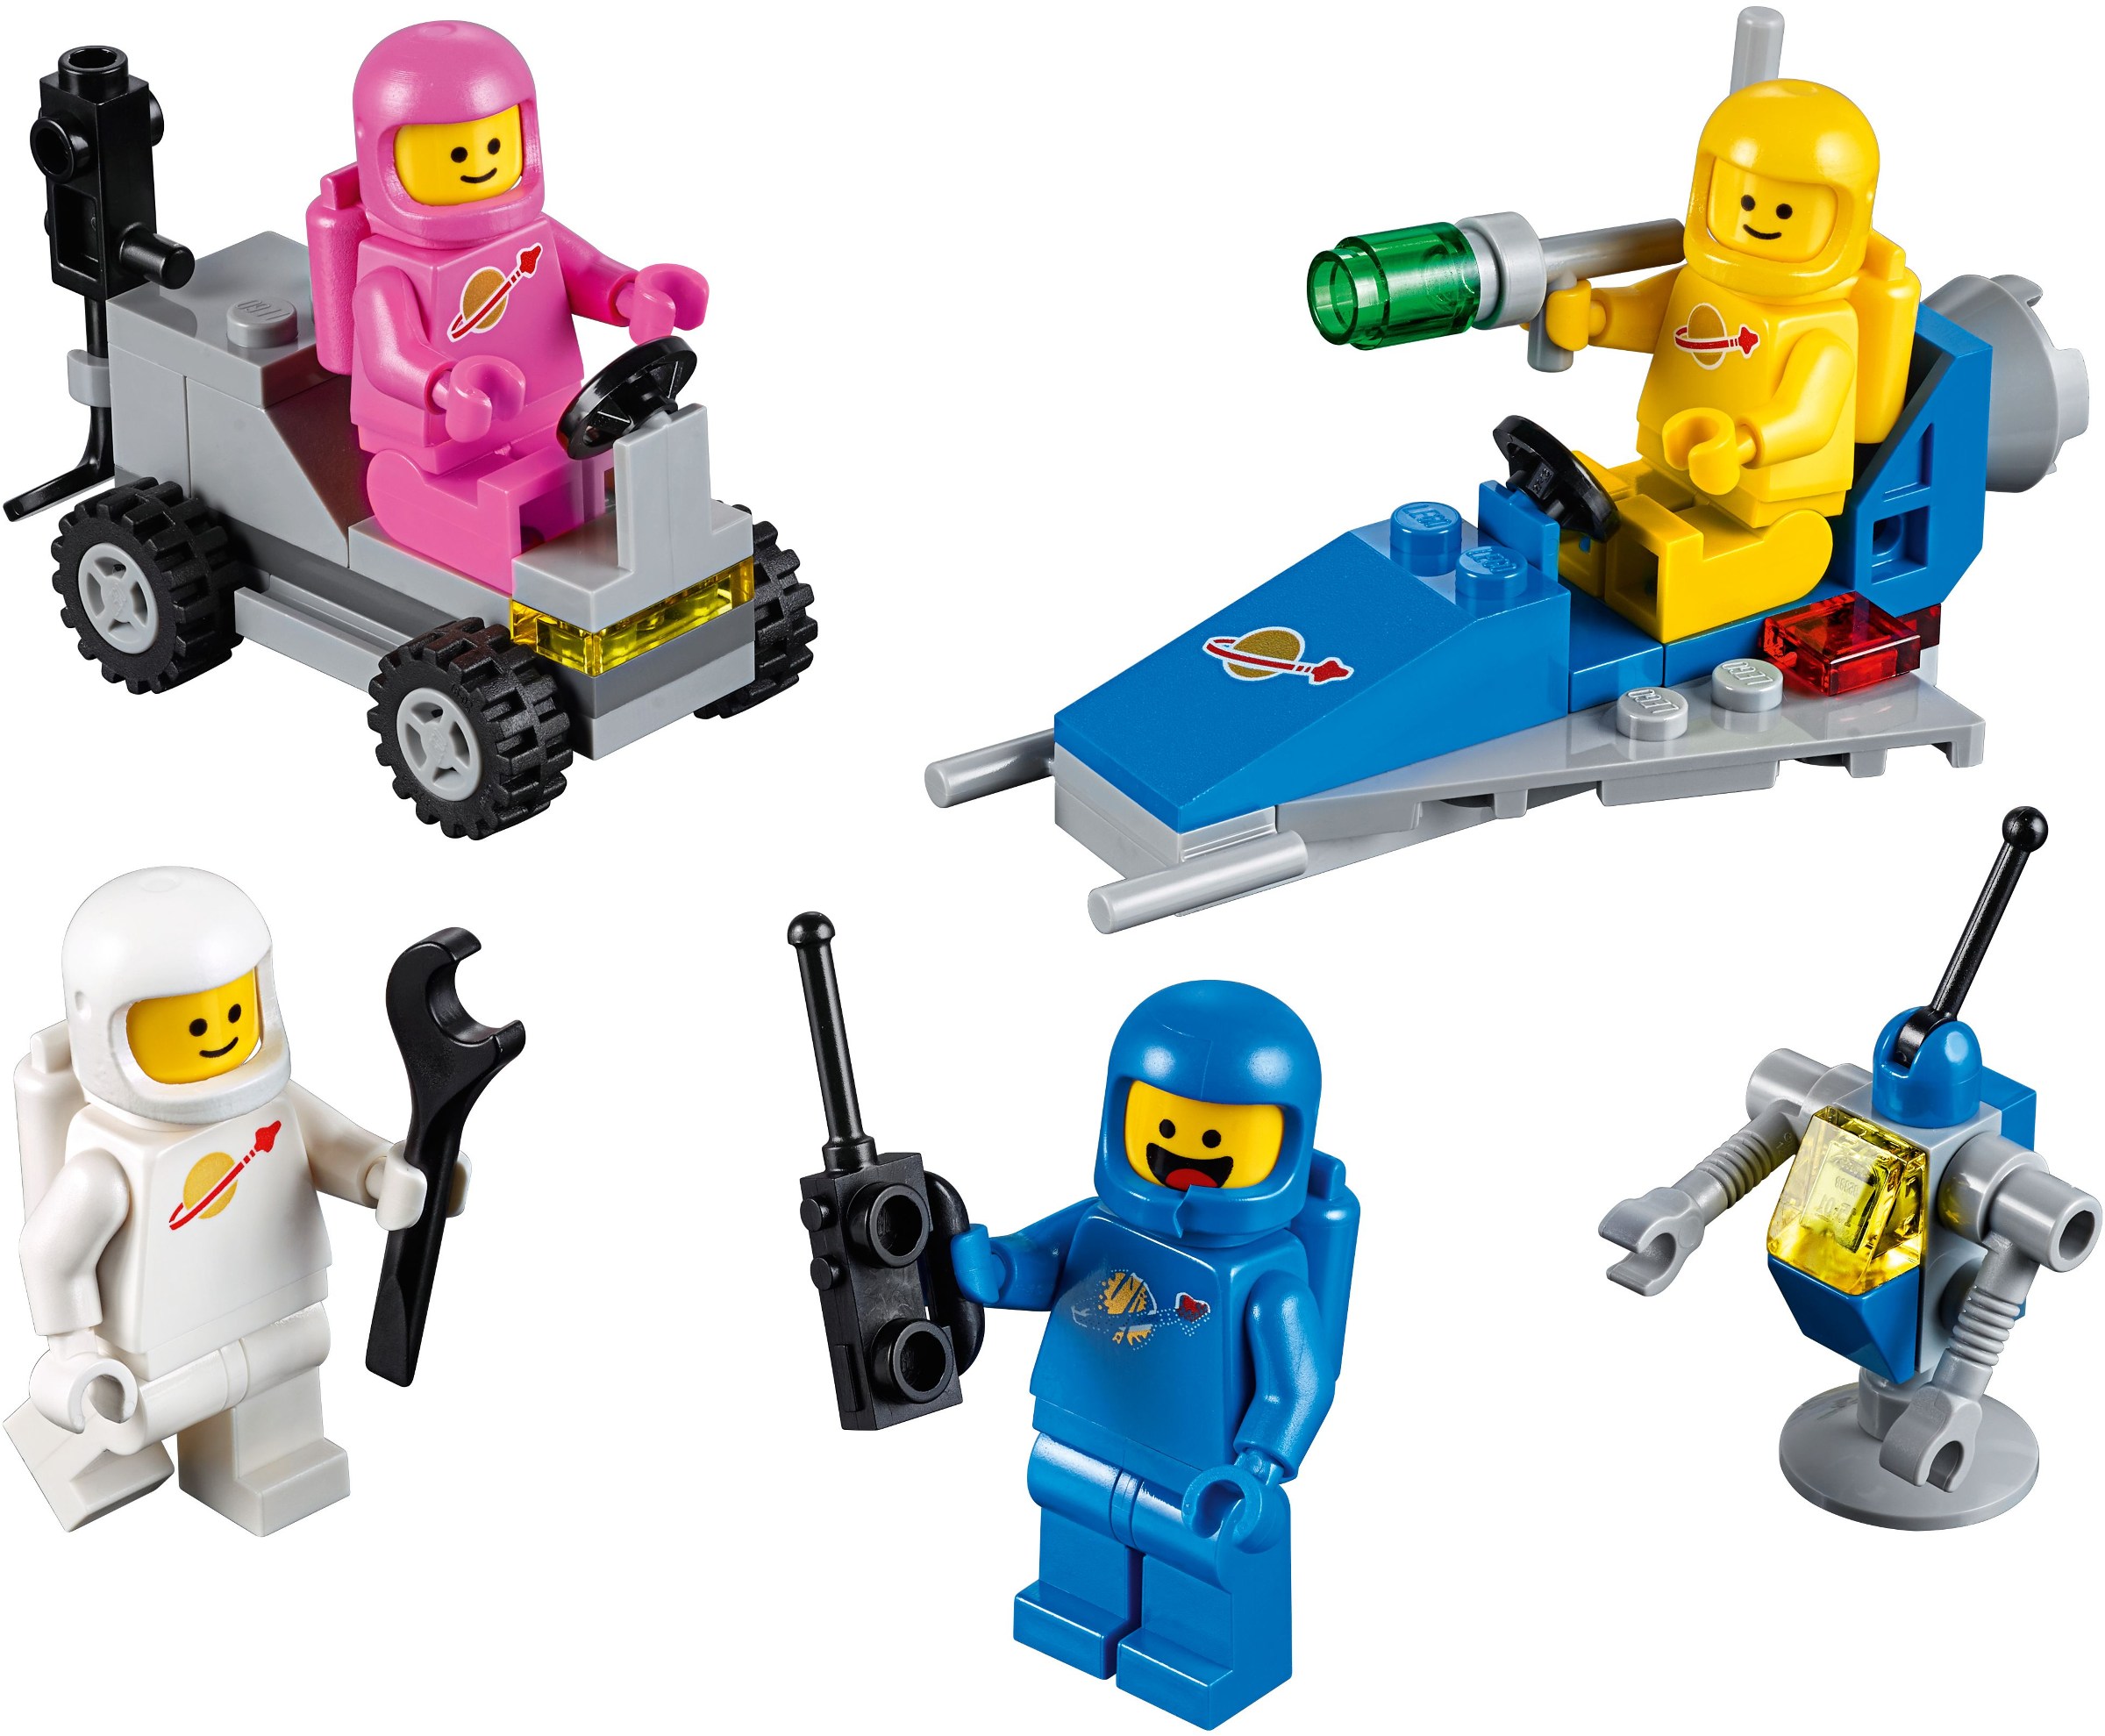 The LEGO Movie 2: The Second Part sets 